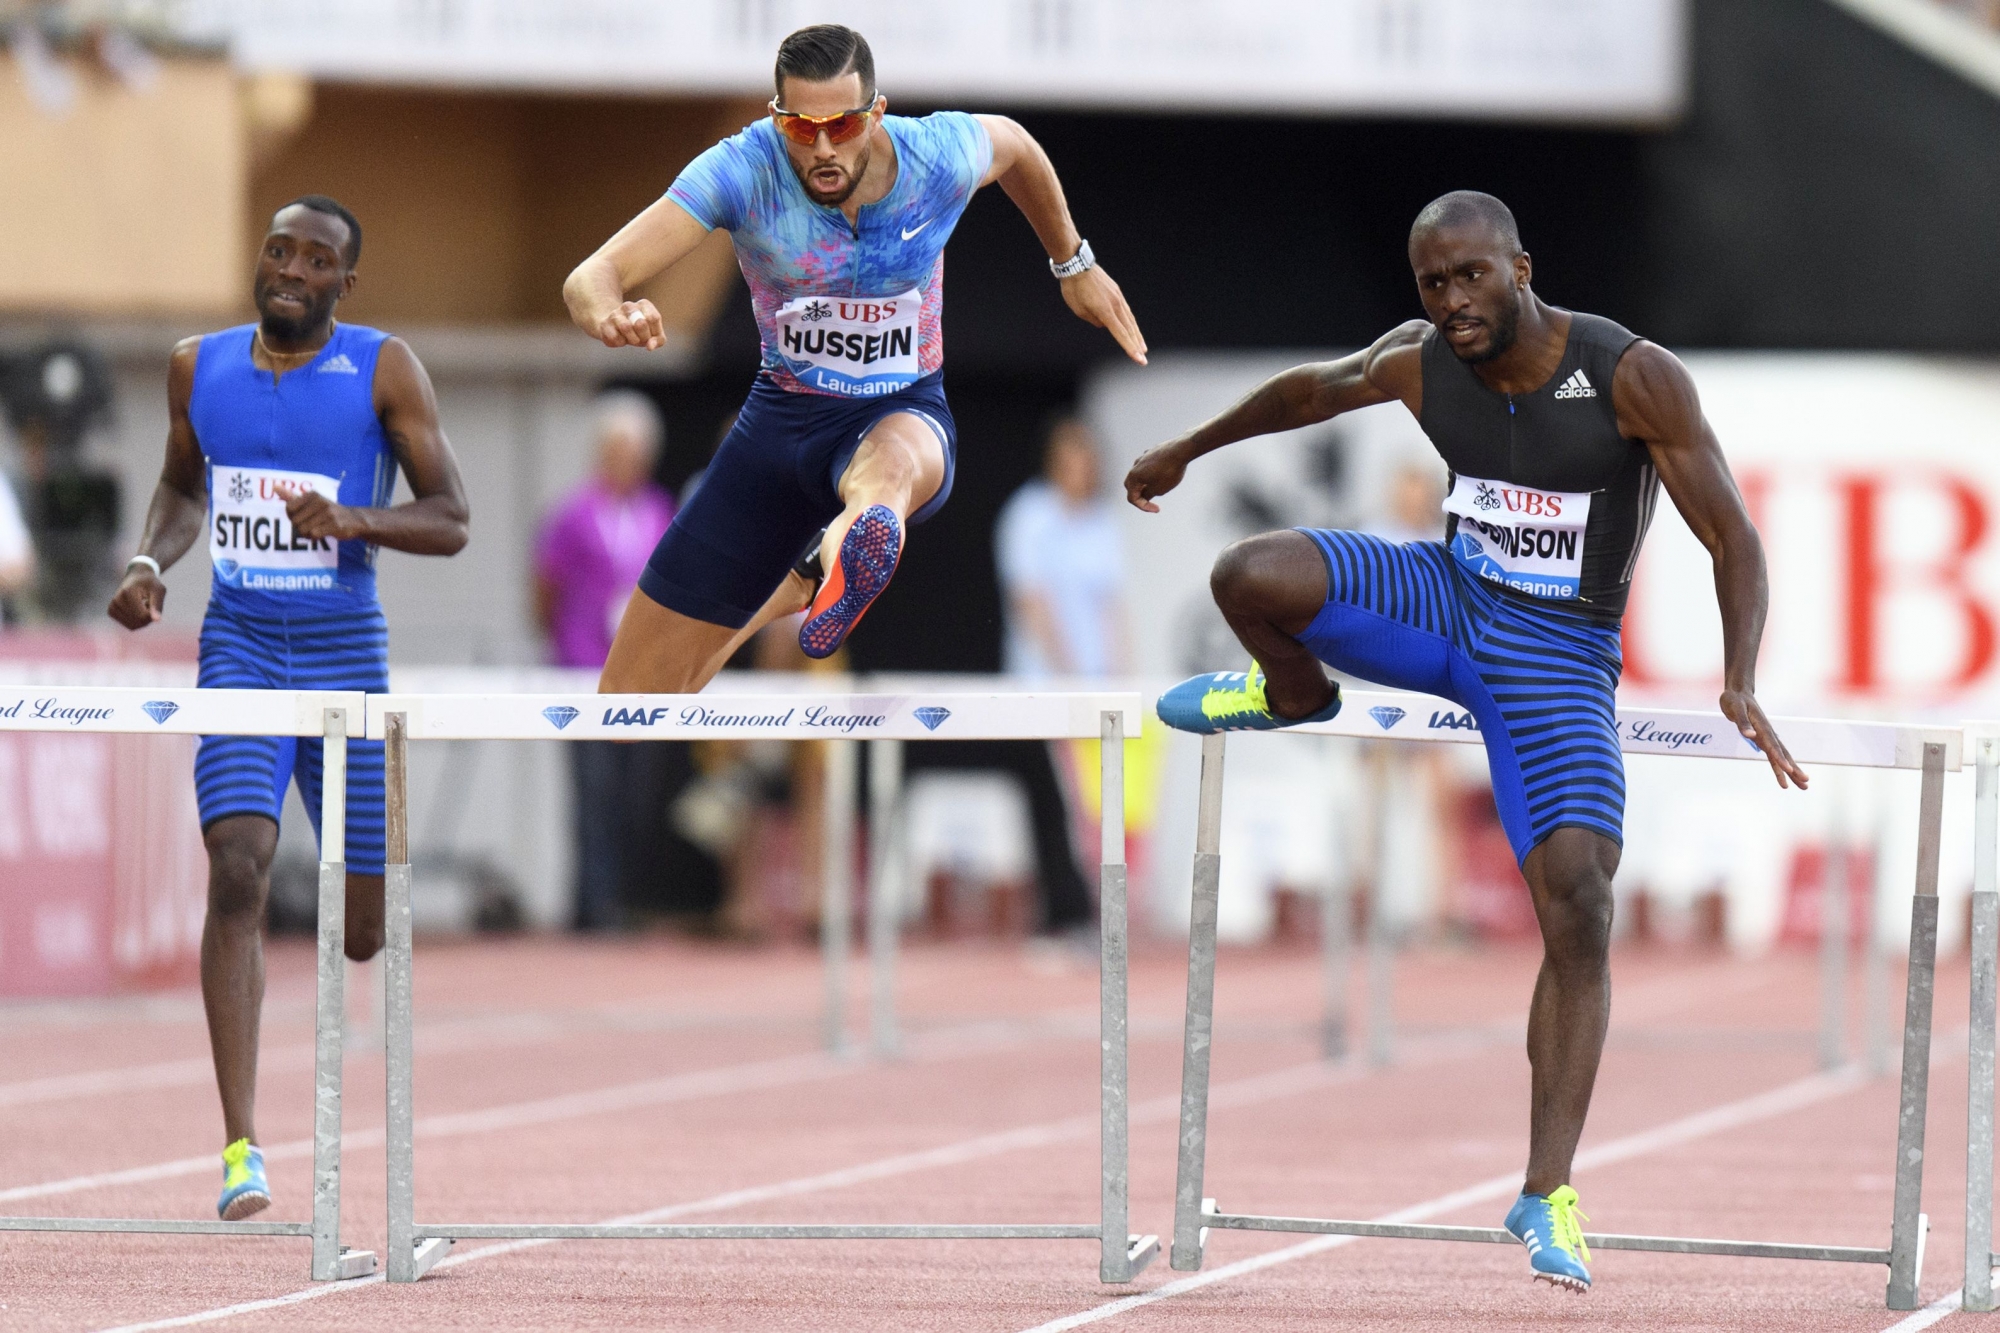 Michael Stigler from the USA, Kariem Hussein from Switzerland and Byron Robinson from the USA, from left, compete in the men's 400m hurdles race at the Athletissima IAAF Diamond League international athletics meeting in the Stade Olympique de la Pontaise in Lausanne, Switzerland, Thursday, July 6, 2017. (KEYSTONE/Jean-Christophe Bott)